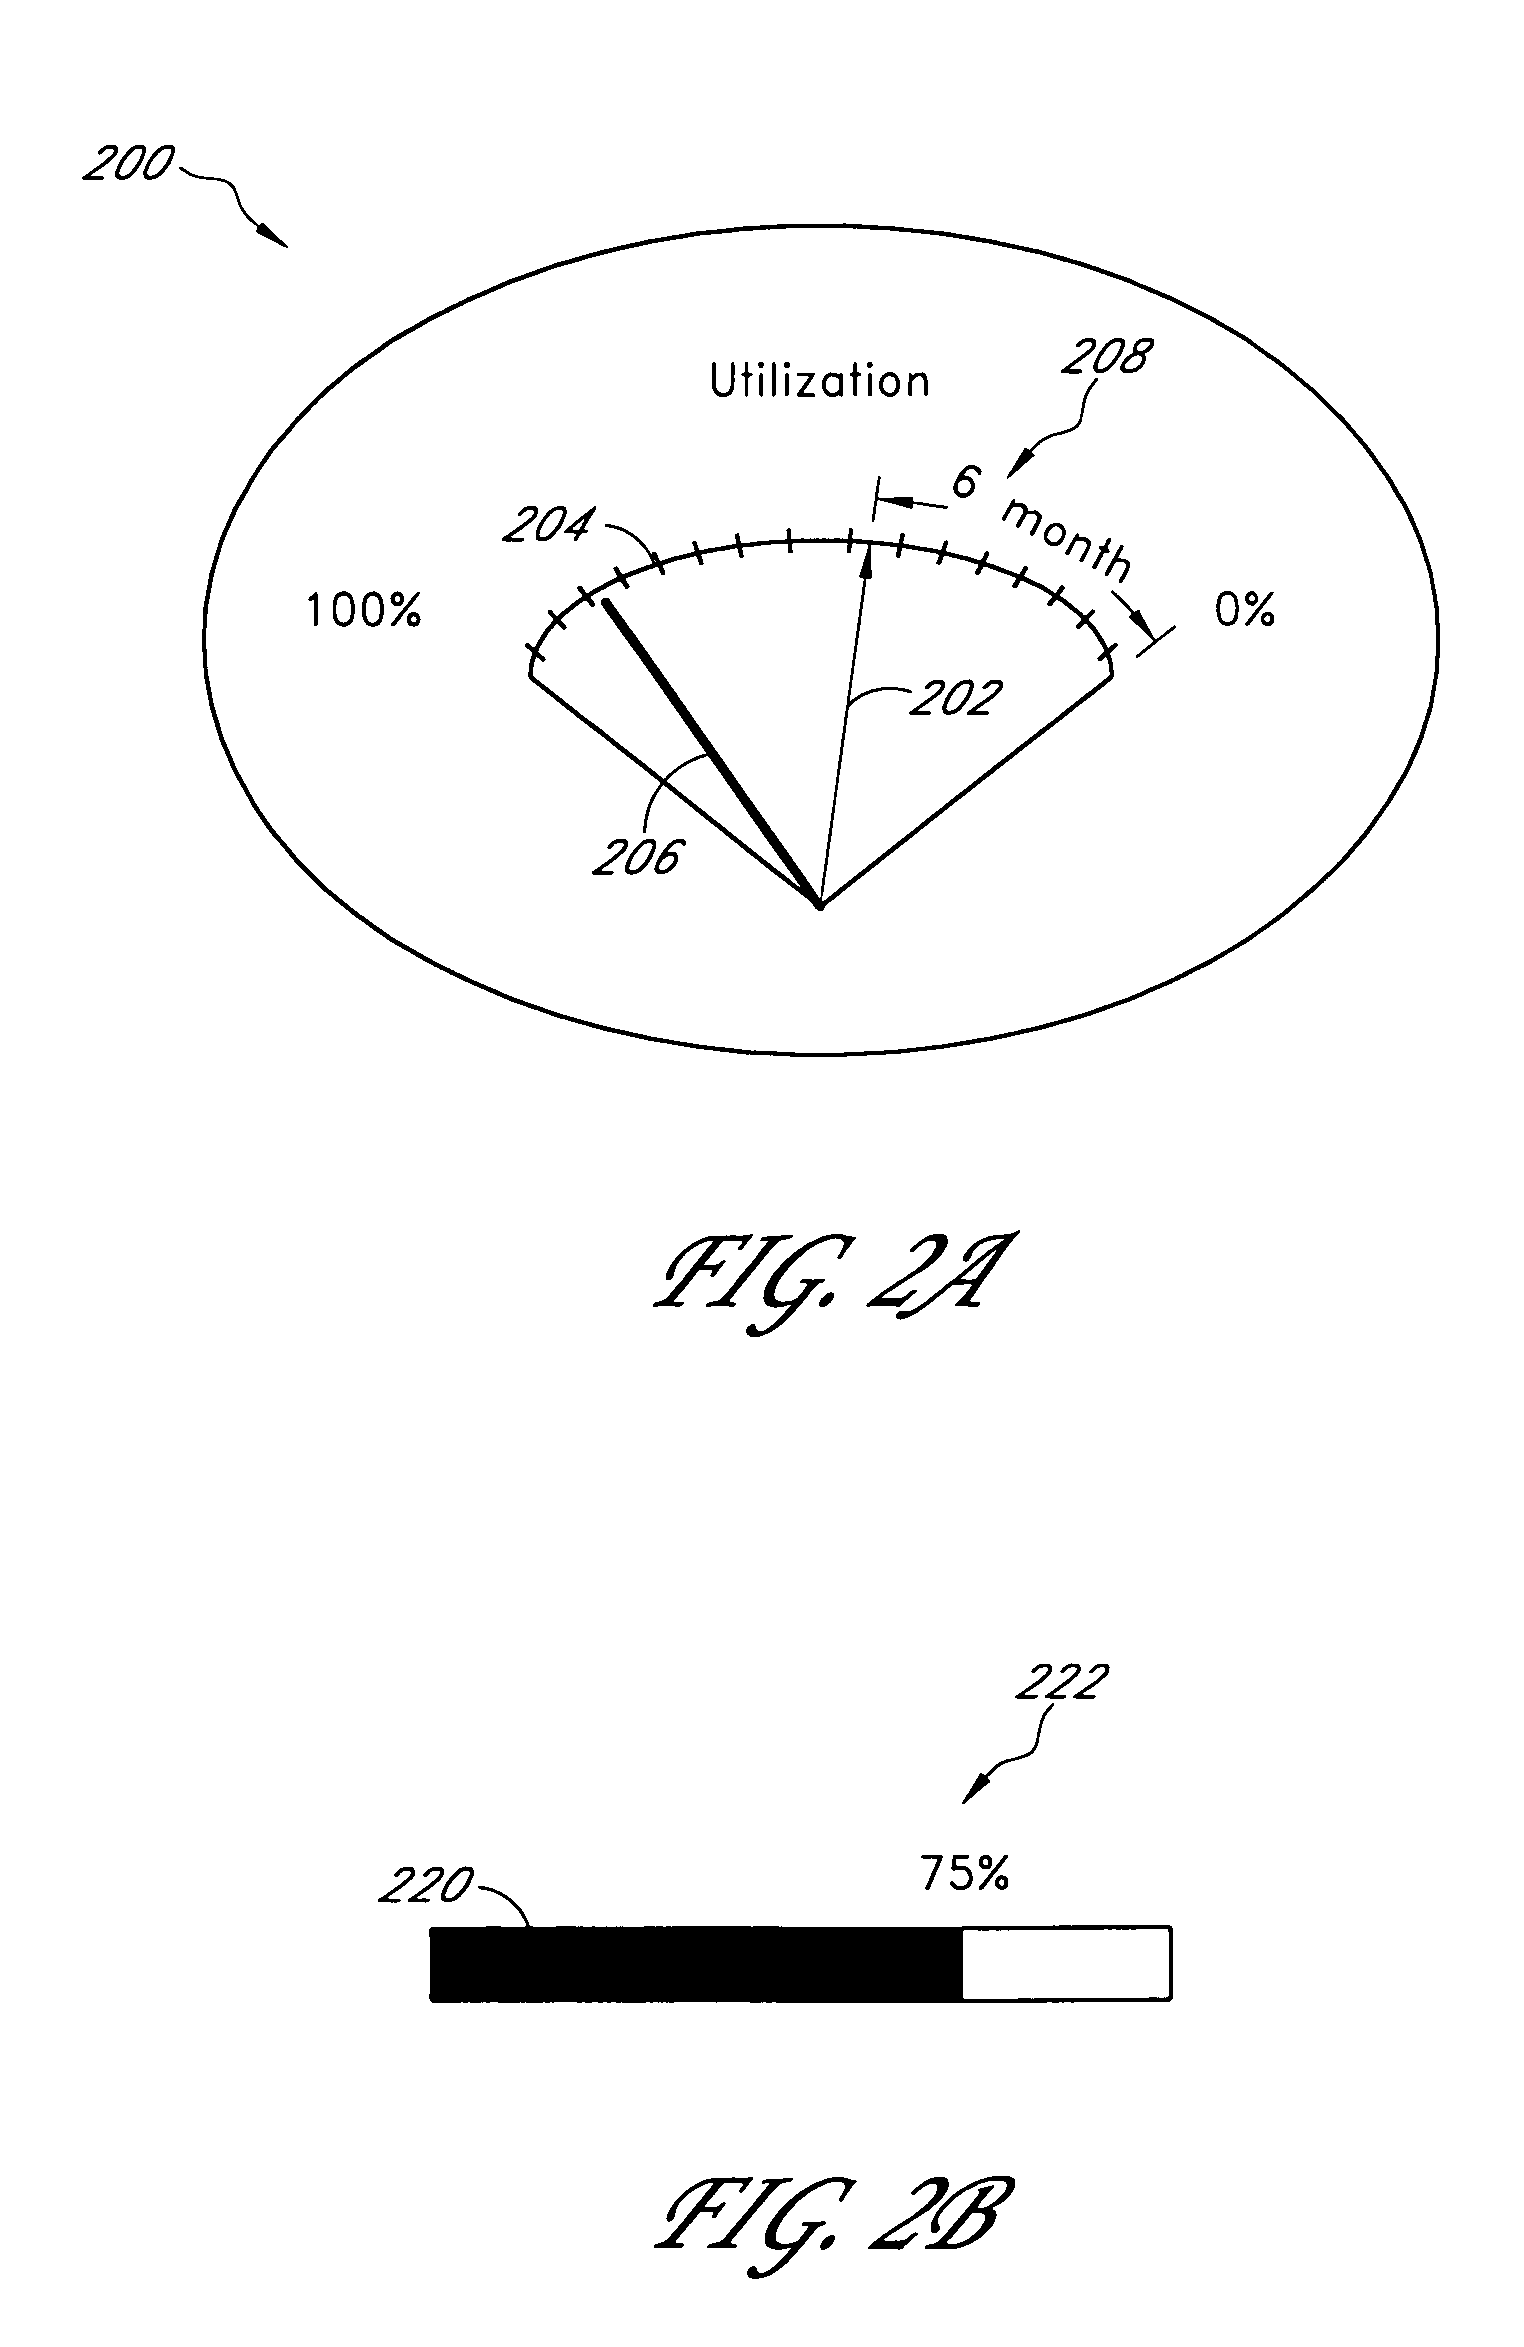 Systems and methods for measuring the useful life of solid-state storage devices